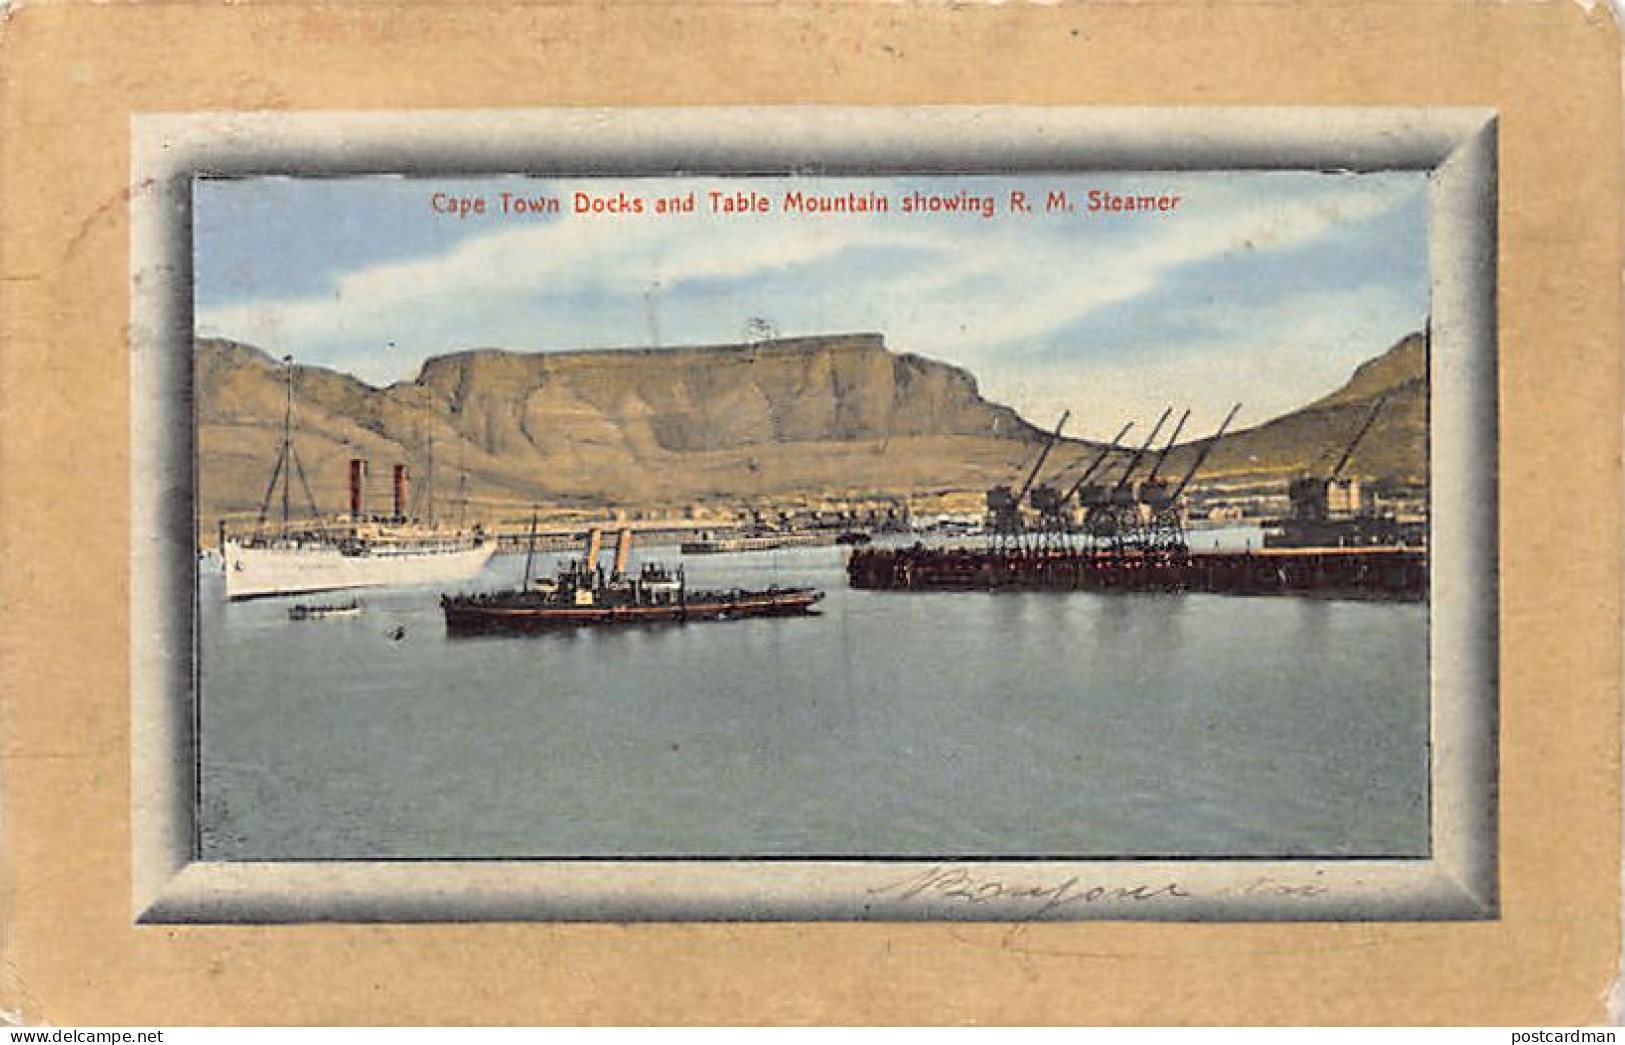 South Africa - CAPE TOWN - Docks And Table Mountain Showing Royal Mail Steamer - Publ. Spes Bona Series  - Südafrika